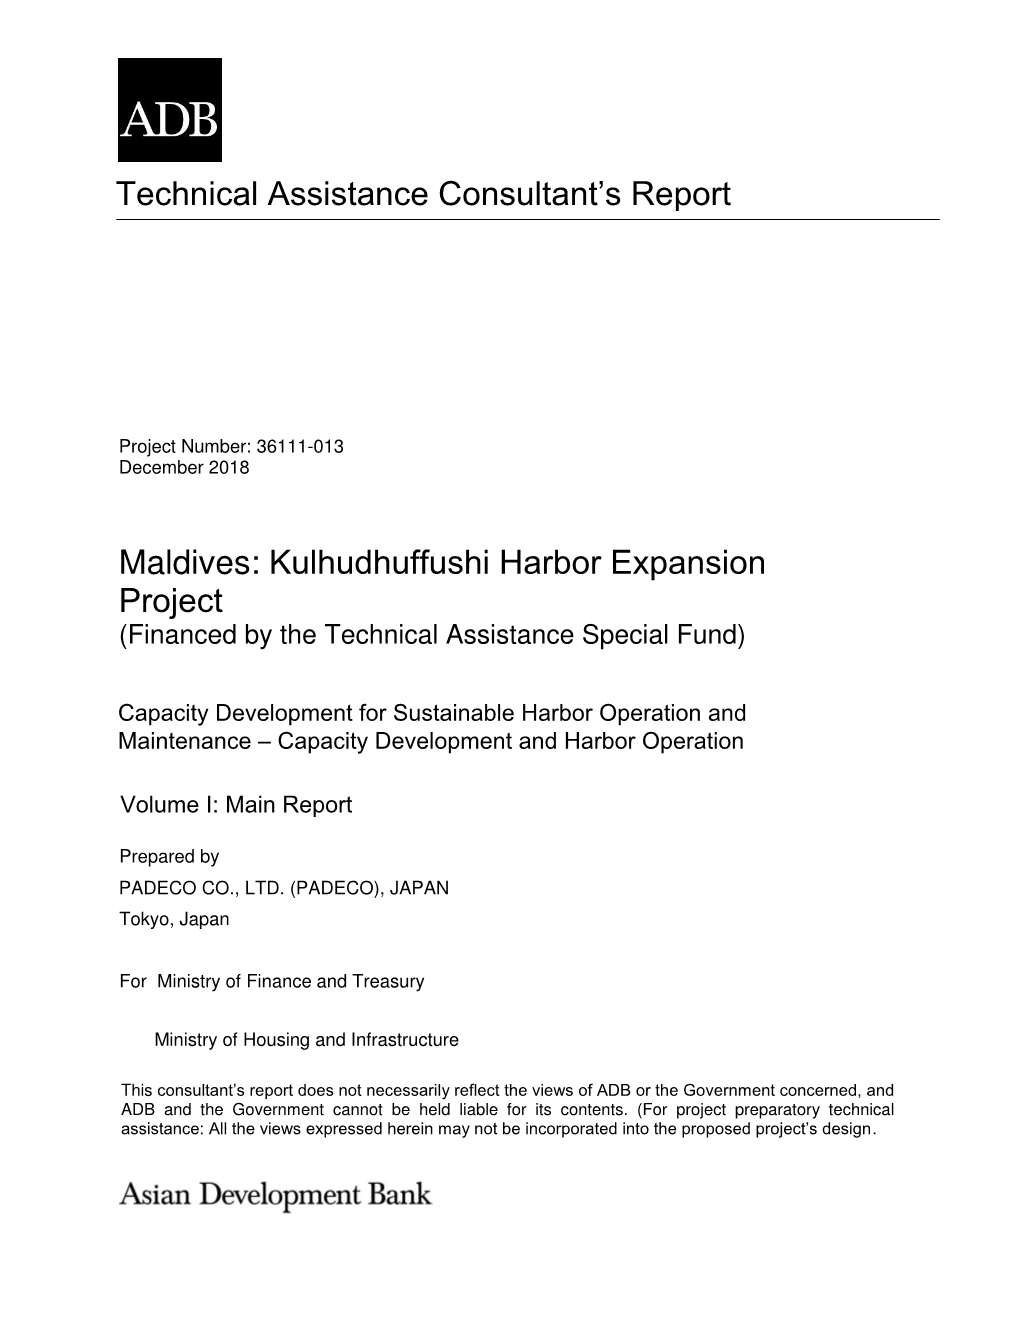 Technical Assistance Consultant's Report Maldives: Kulhudhuffushi Harbor Expansion Project